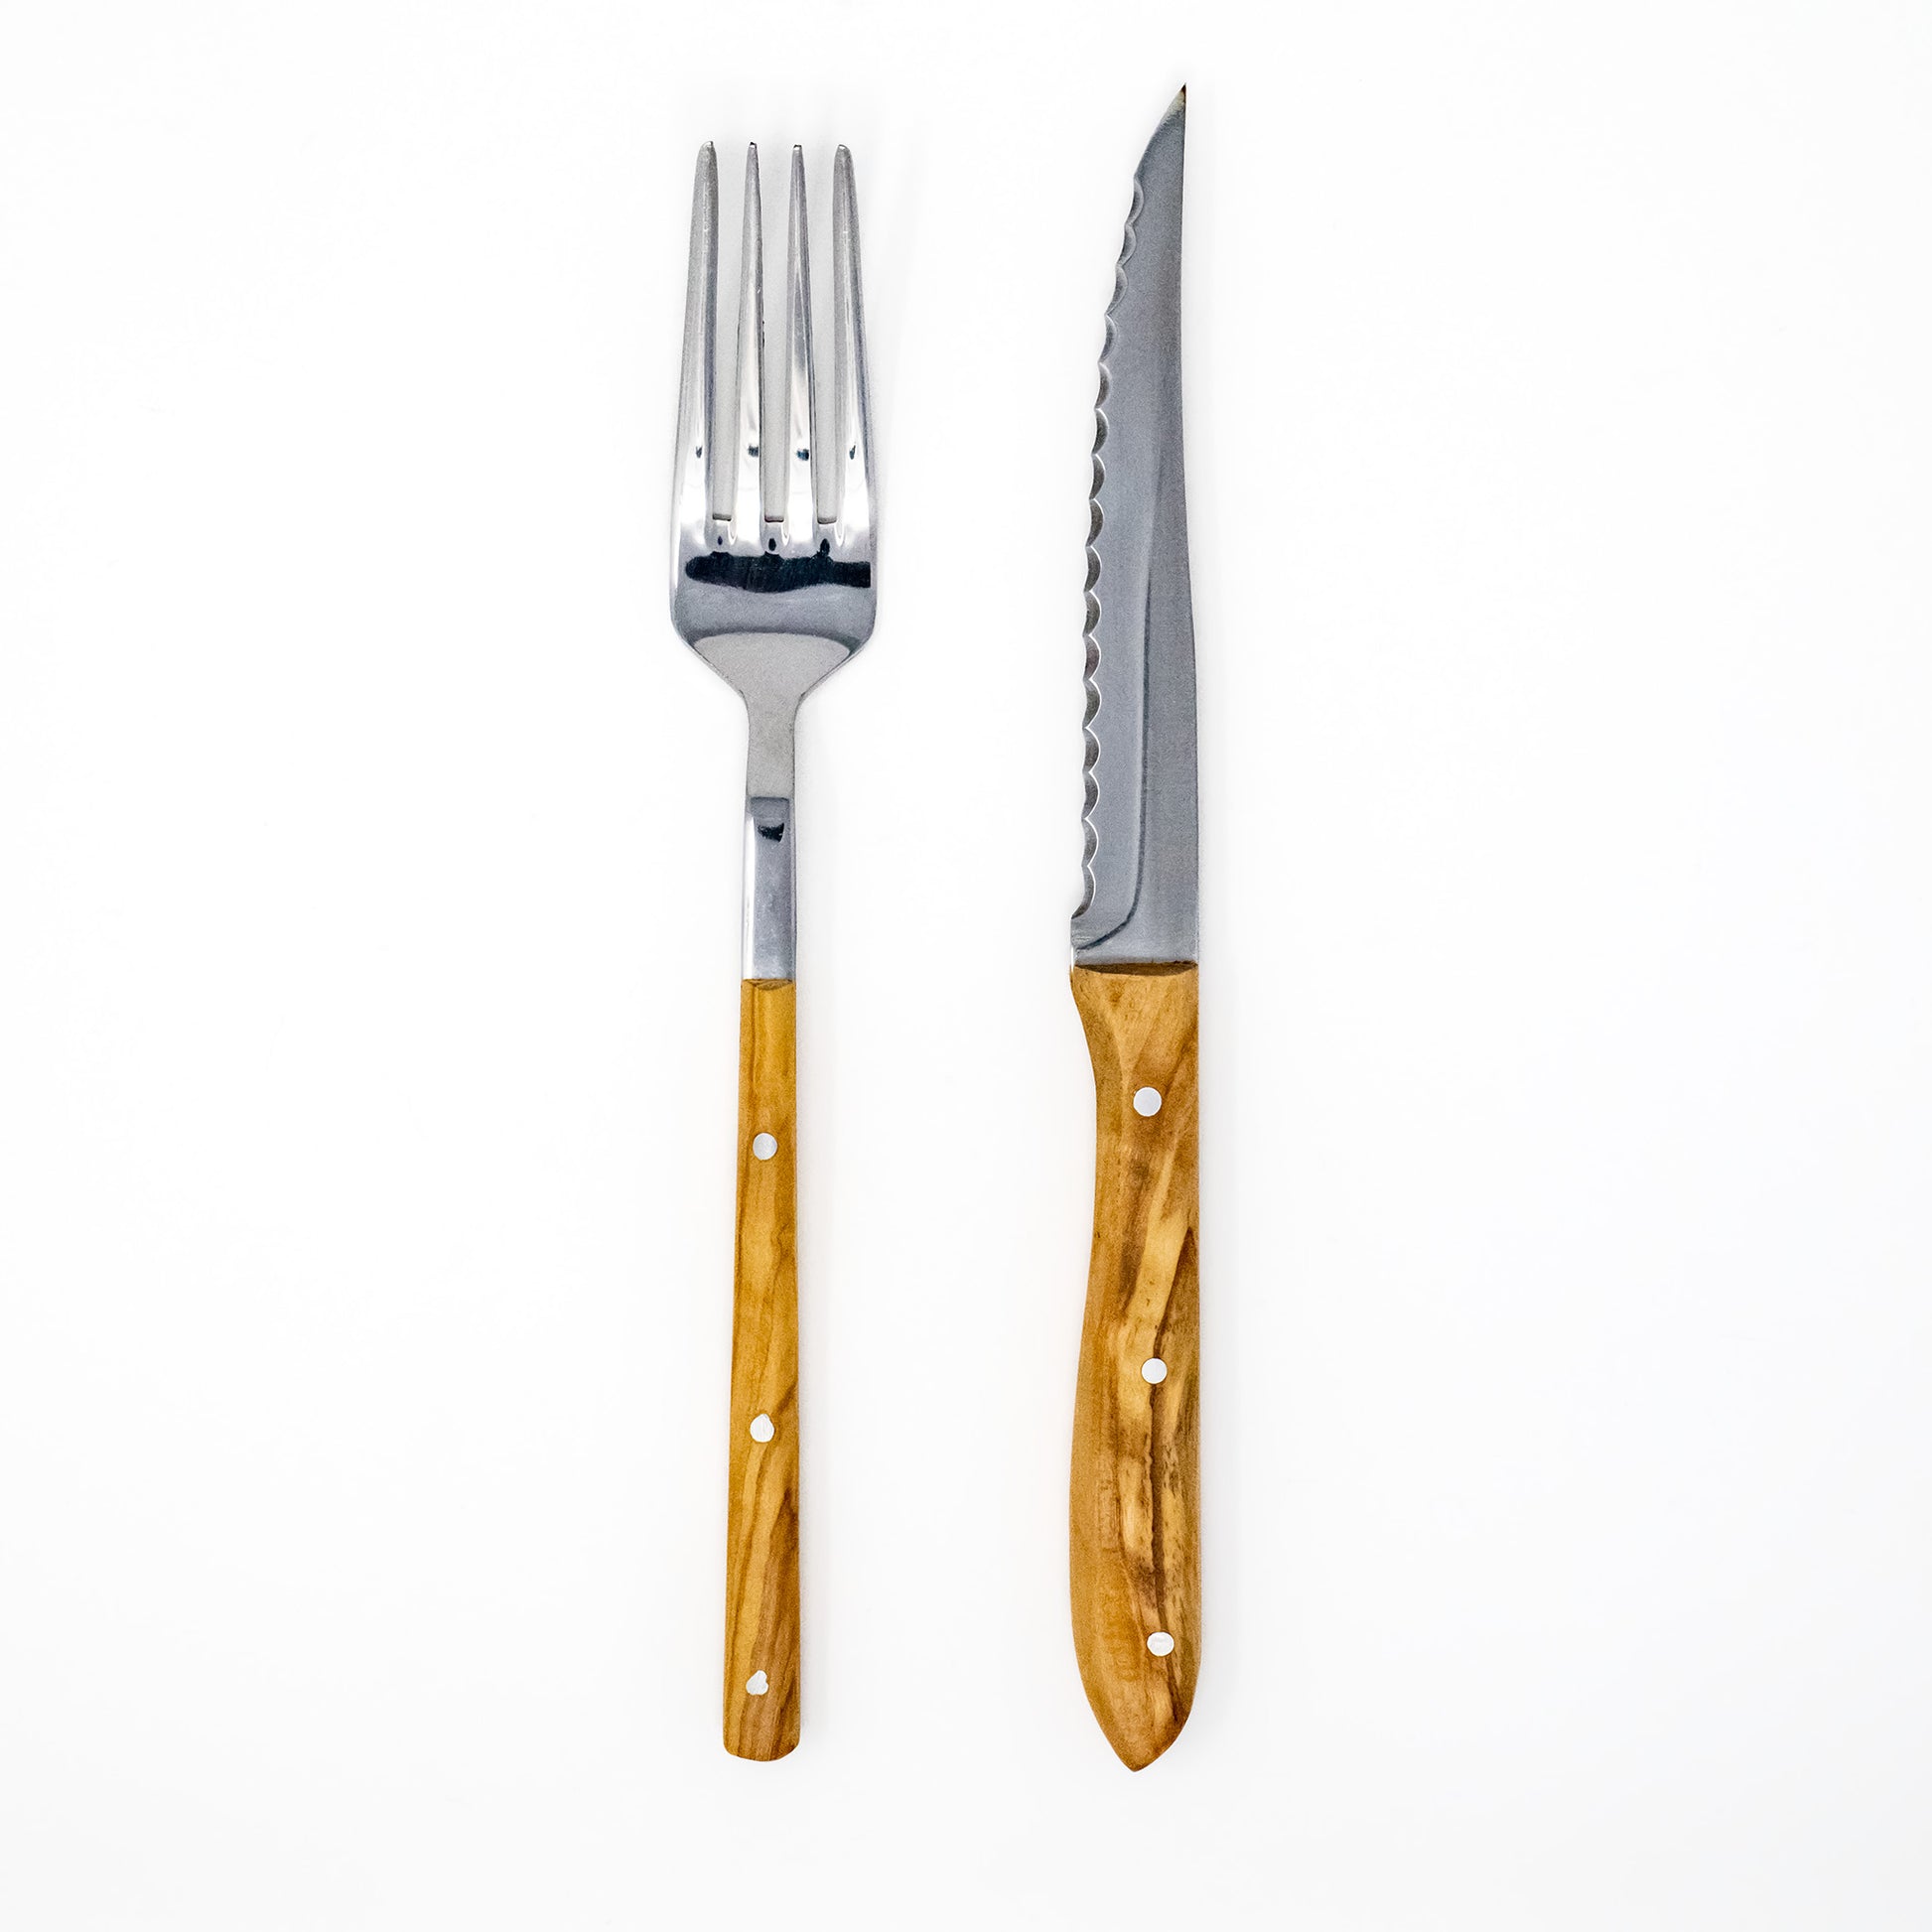 Steak knife and fork, perfect cutlery for steak, meat and other hard food.